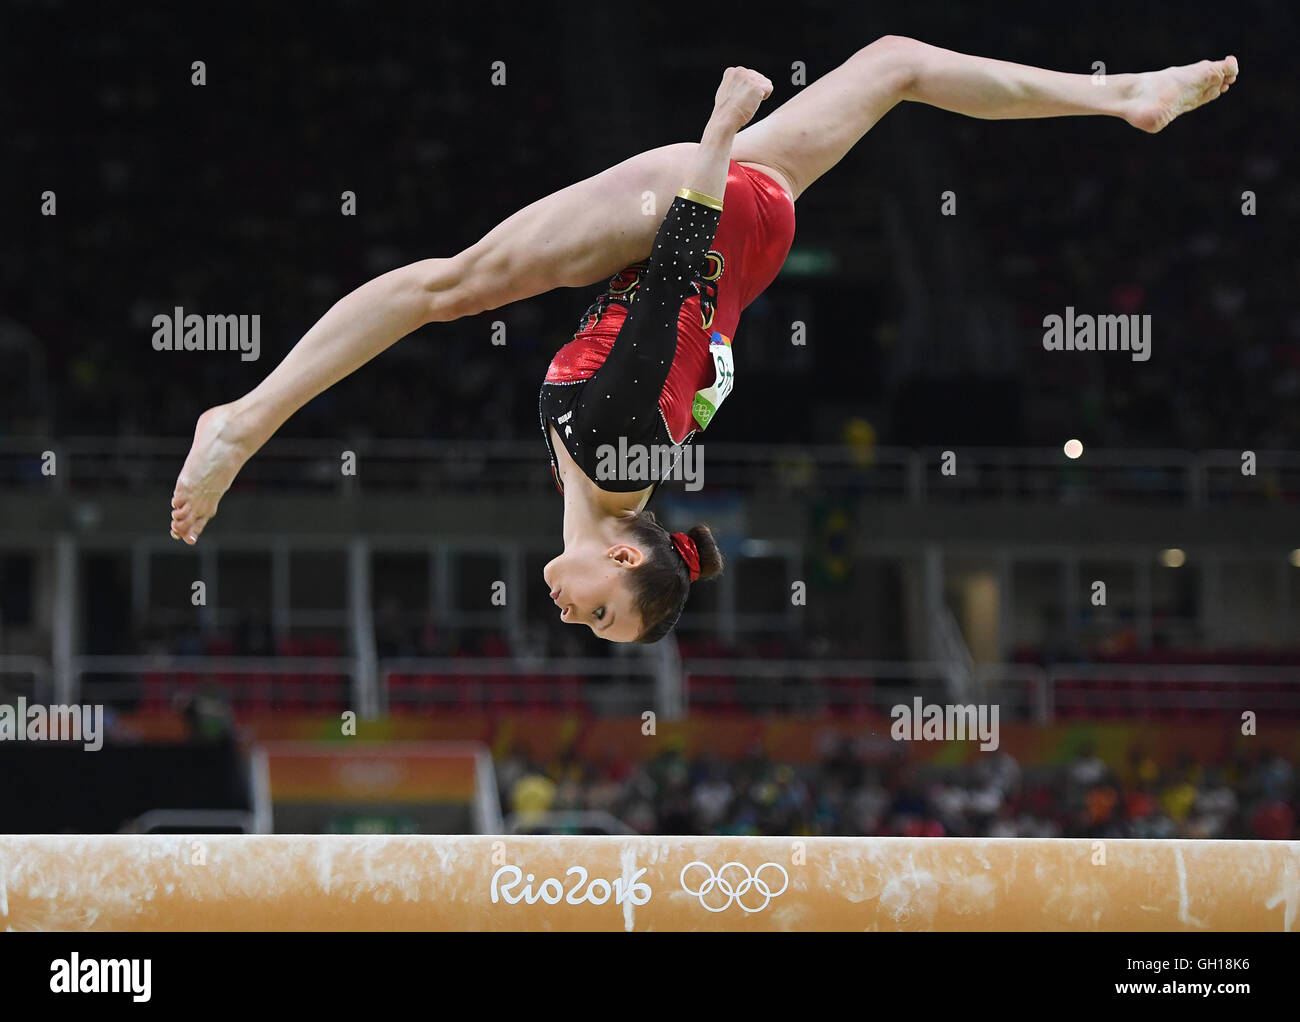 Rio de Janeiro, Brazil 07th Aug, 2016 Rio de Janeiro, Brazil 07th Aug, 2016 Sophie Scheder of Germany competes on the balance beam during the Women's Qualification Artistic Gymnastics event of the Rio 2016 Olympic Games at the Rio Olympic Arena, Rio de Janeiro, Brazil, 7 August 2016. Photo: Felix Kaestle/dpa © dpa picture alliance/Alamy Live News Credit:  dpa picture alliance/Alamy Live News Stock Photo